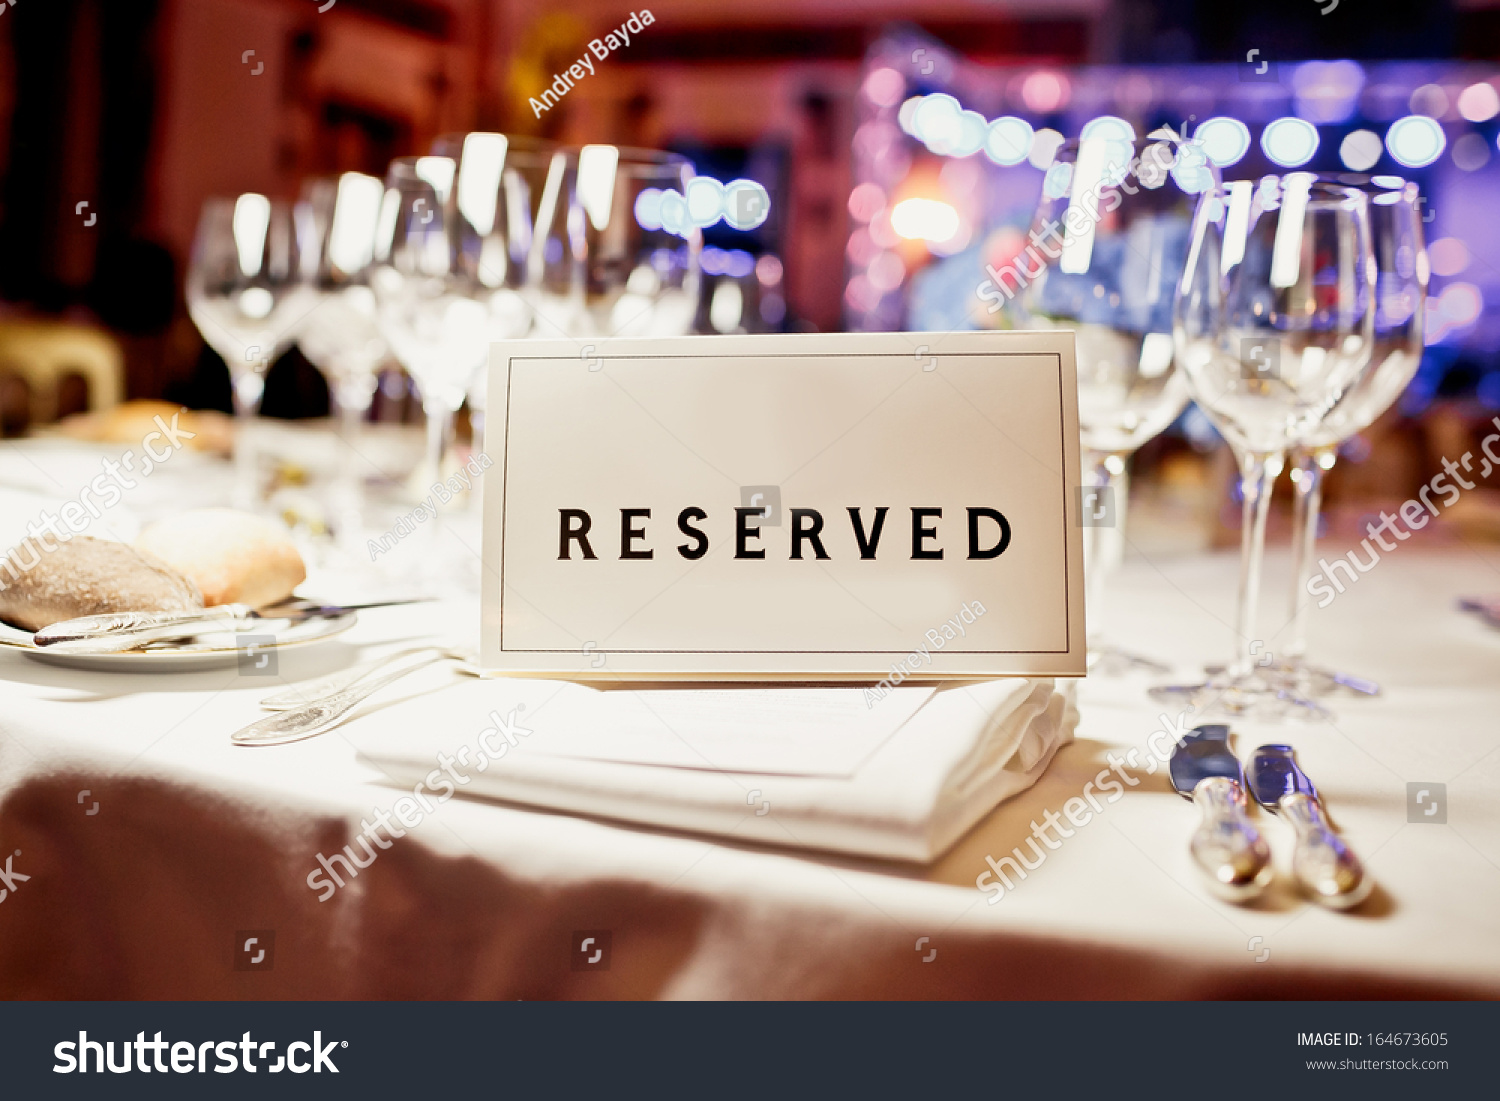 Reserved sign on a table in restaurant #164673605